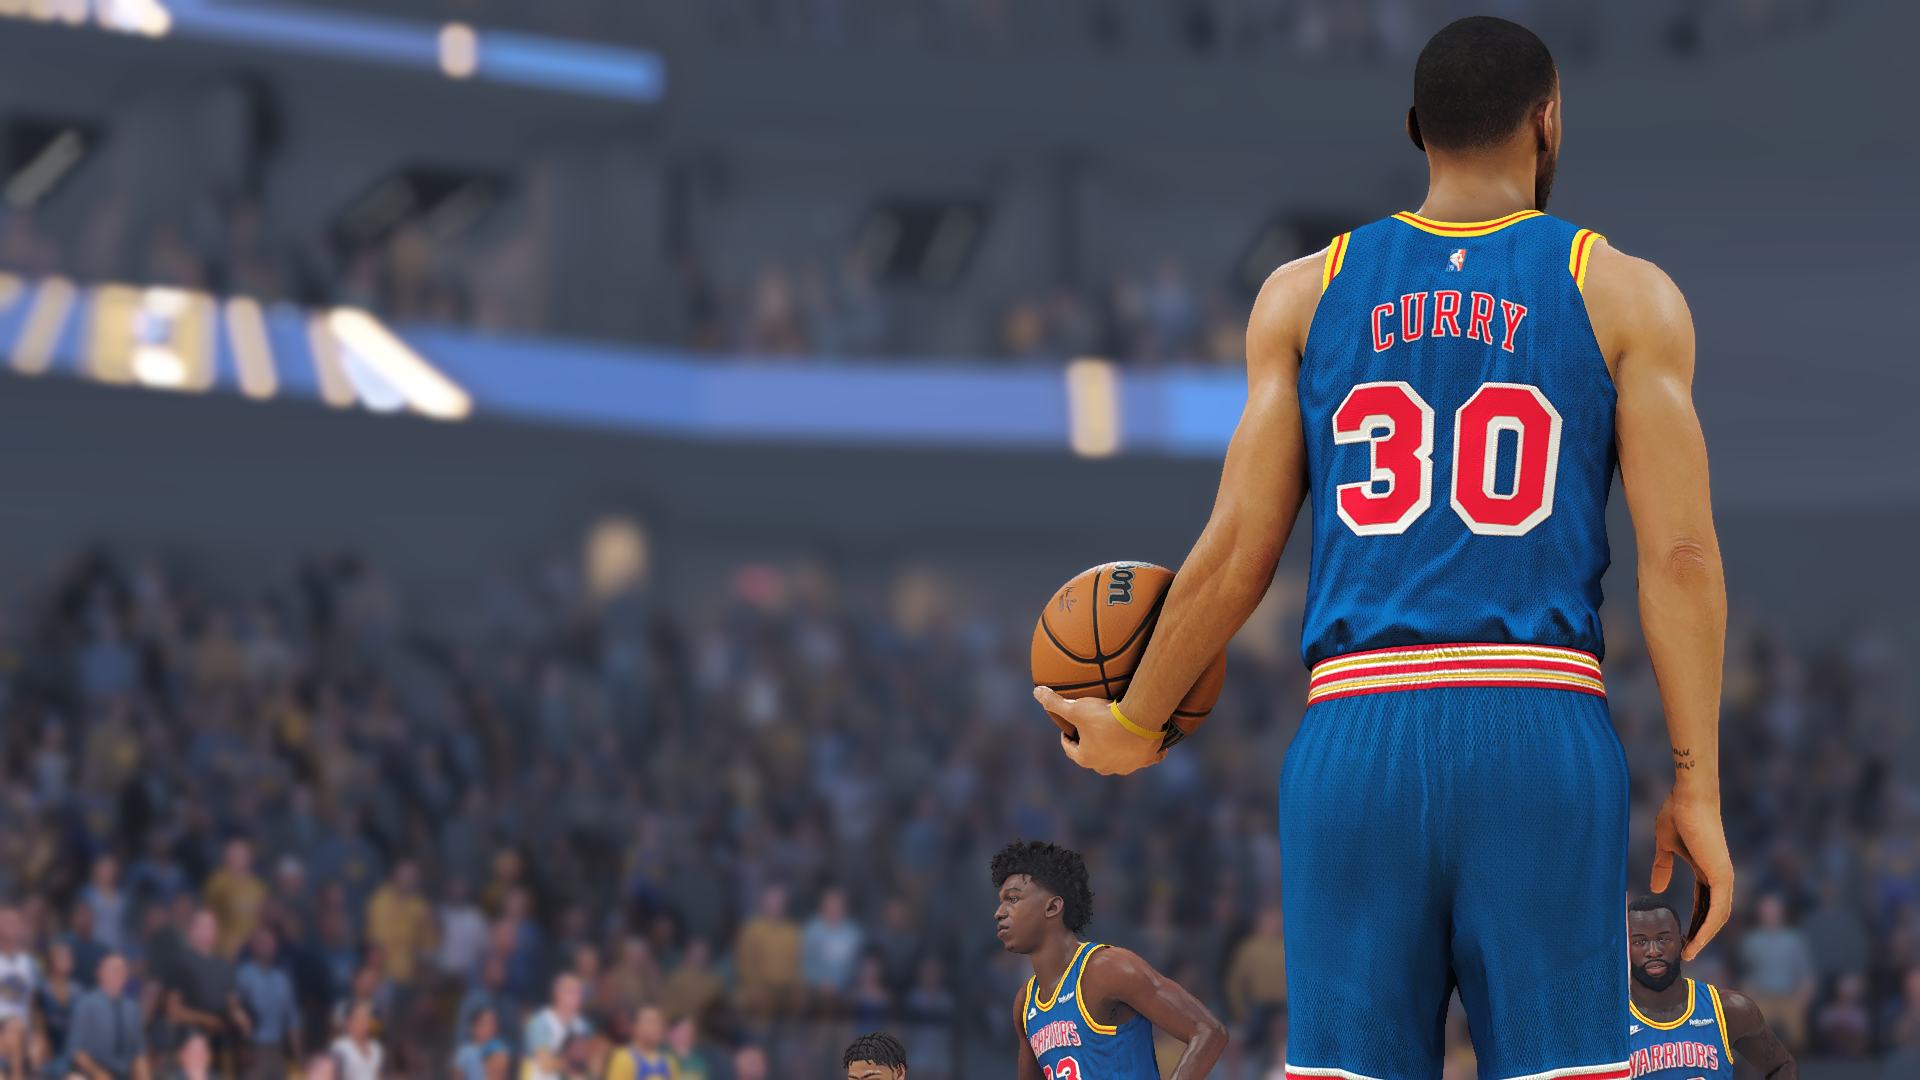 NBA 2K21 Golden State Warriors Classic 75th Anniversary Jersey 2021-22 by  AGP2K Gaming PH - Shuajota: NBA 2K24 Mods, Rosters & Cyberfaces